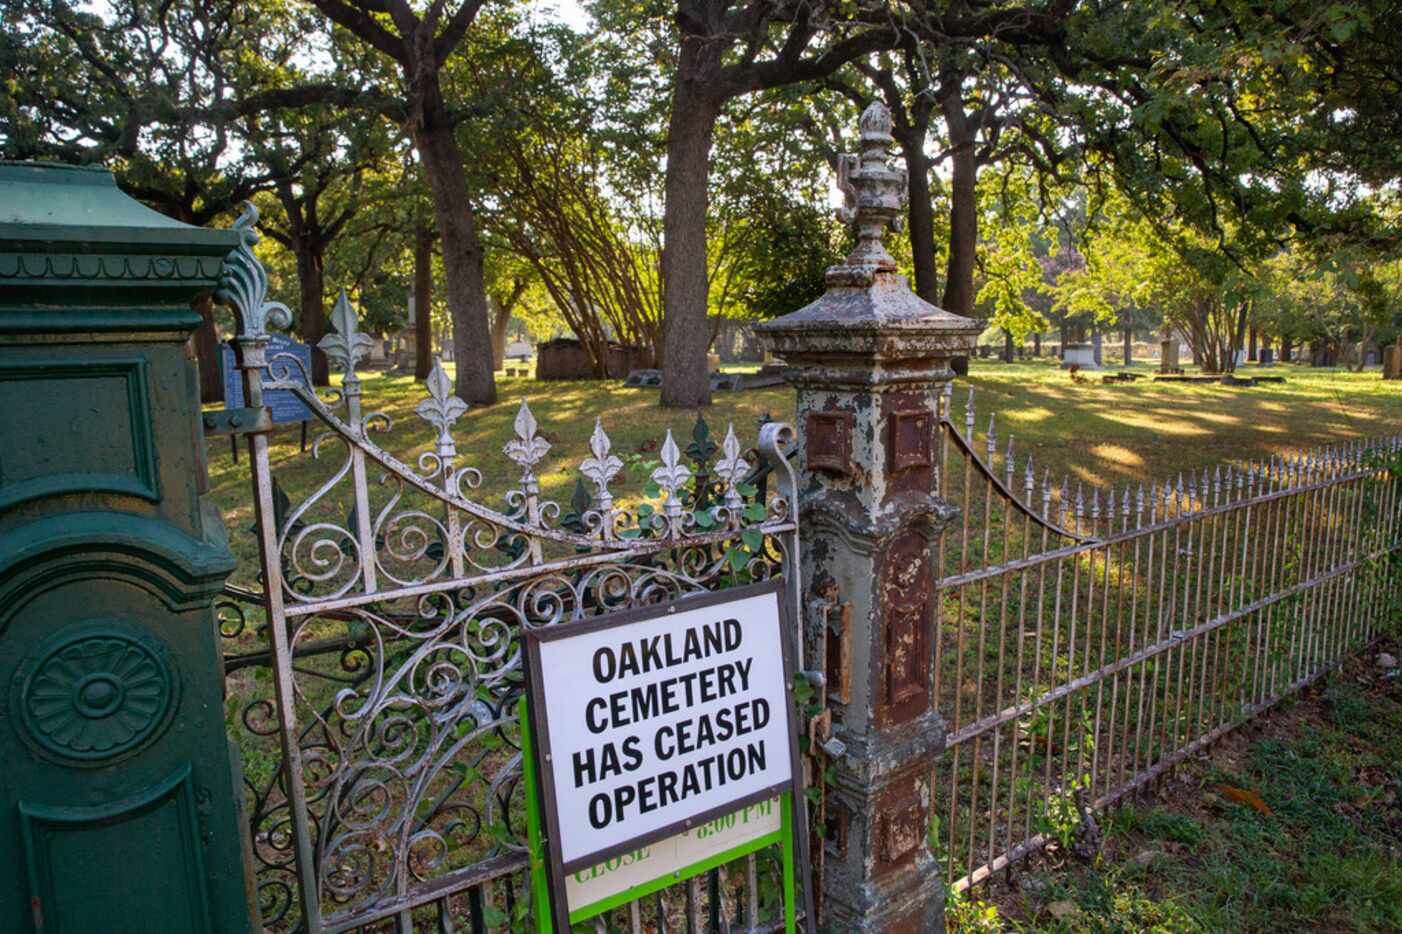 A sign warns visitors that the Oakland Cemetery is no longer operating. It has caught...